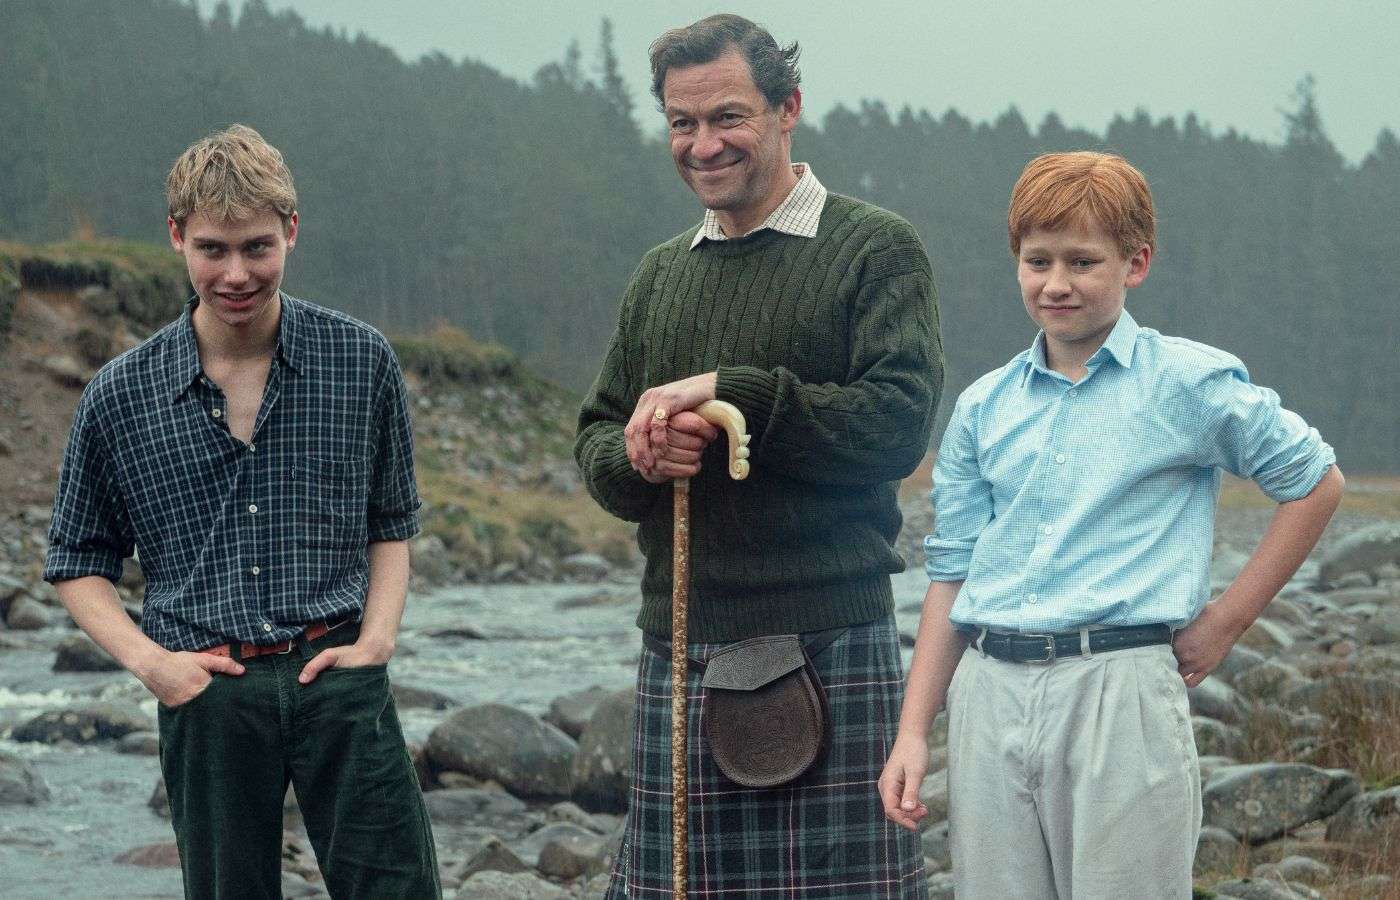 Charles, William, and Harry in The Crown Season 6 Part 2